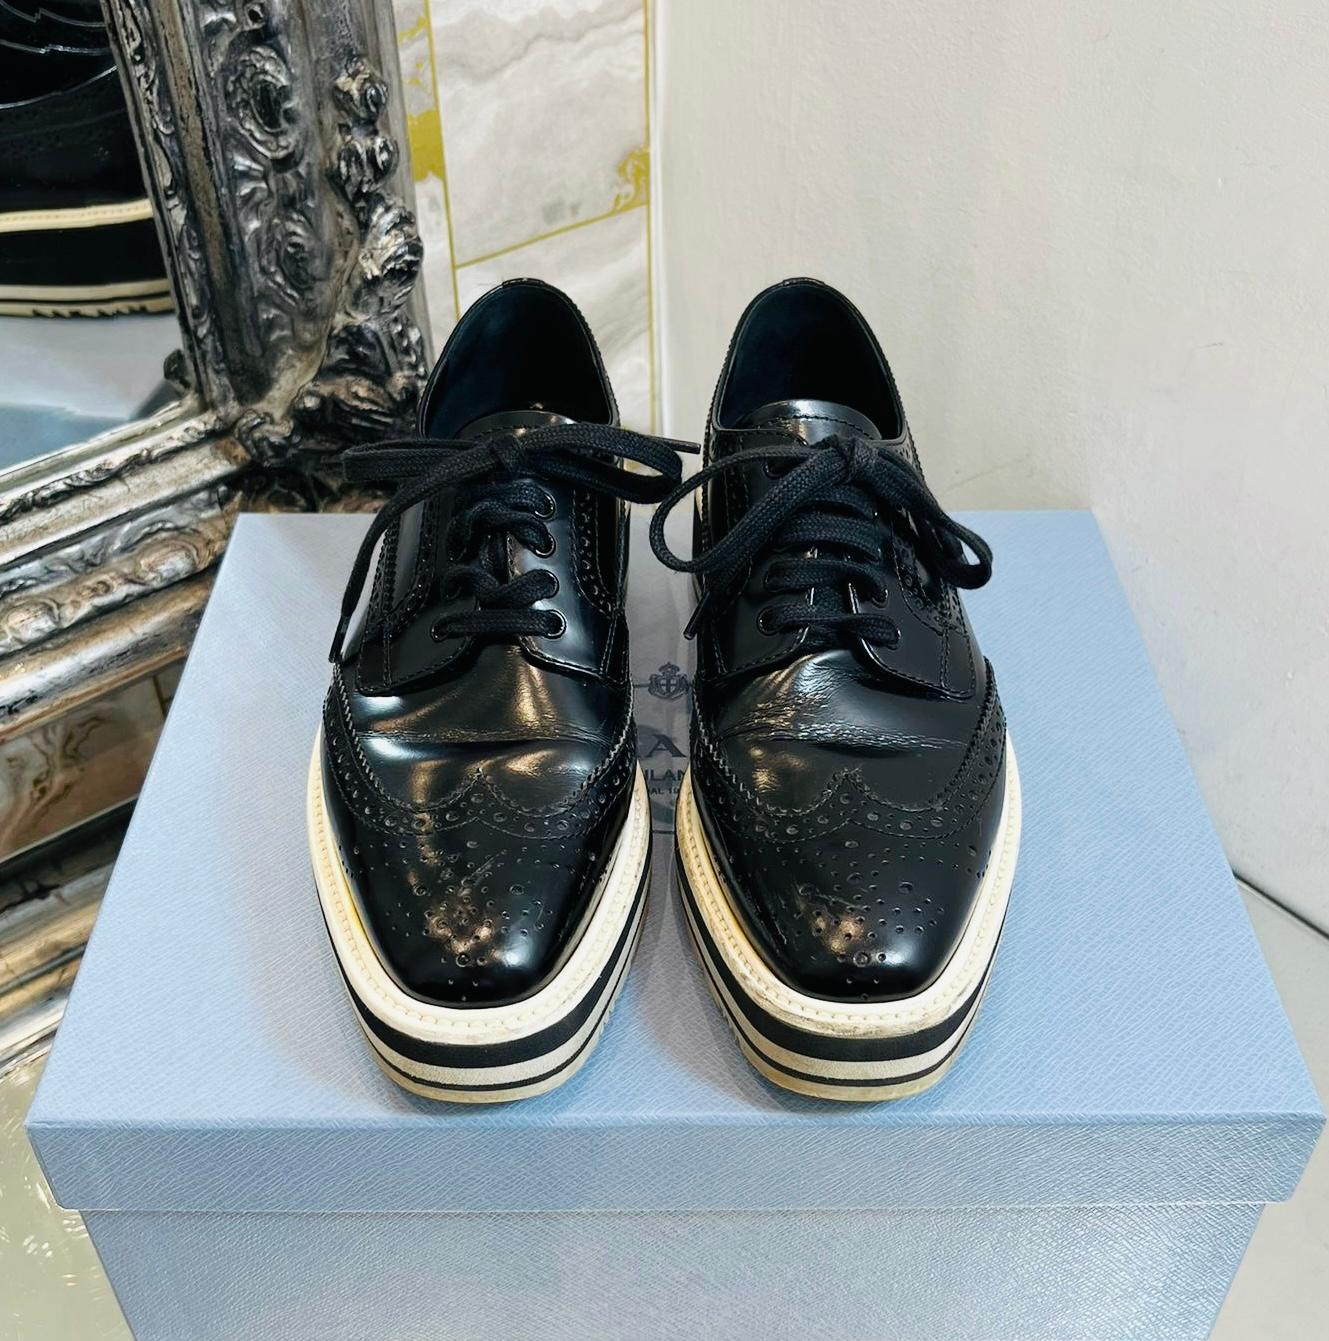 Prada Leather Platform Brogues

Black, lace-up brogues designed with wingtip detailing throughout.

Featuring almond toe and striped black & white platform.

Leather lining and insoles. Rrp £980.

Size – 35

Condition – Good (Scratches to the